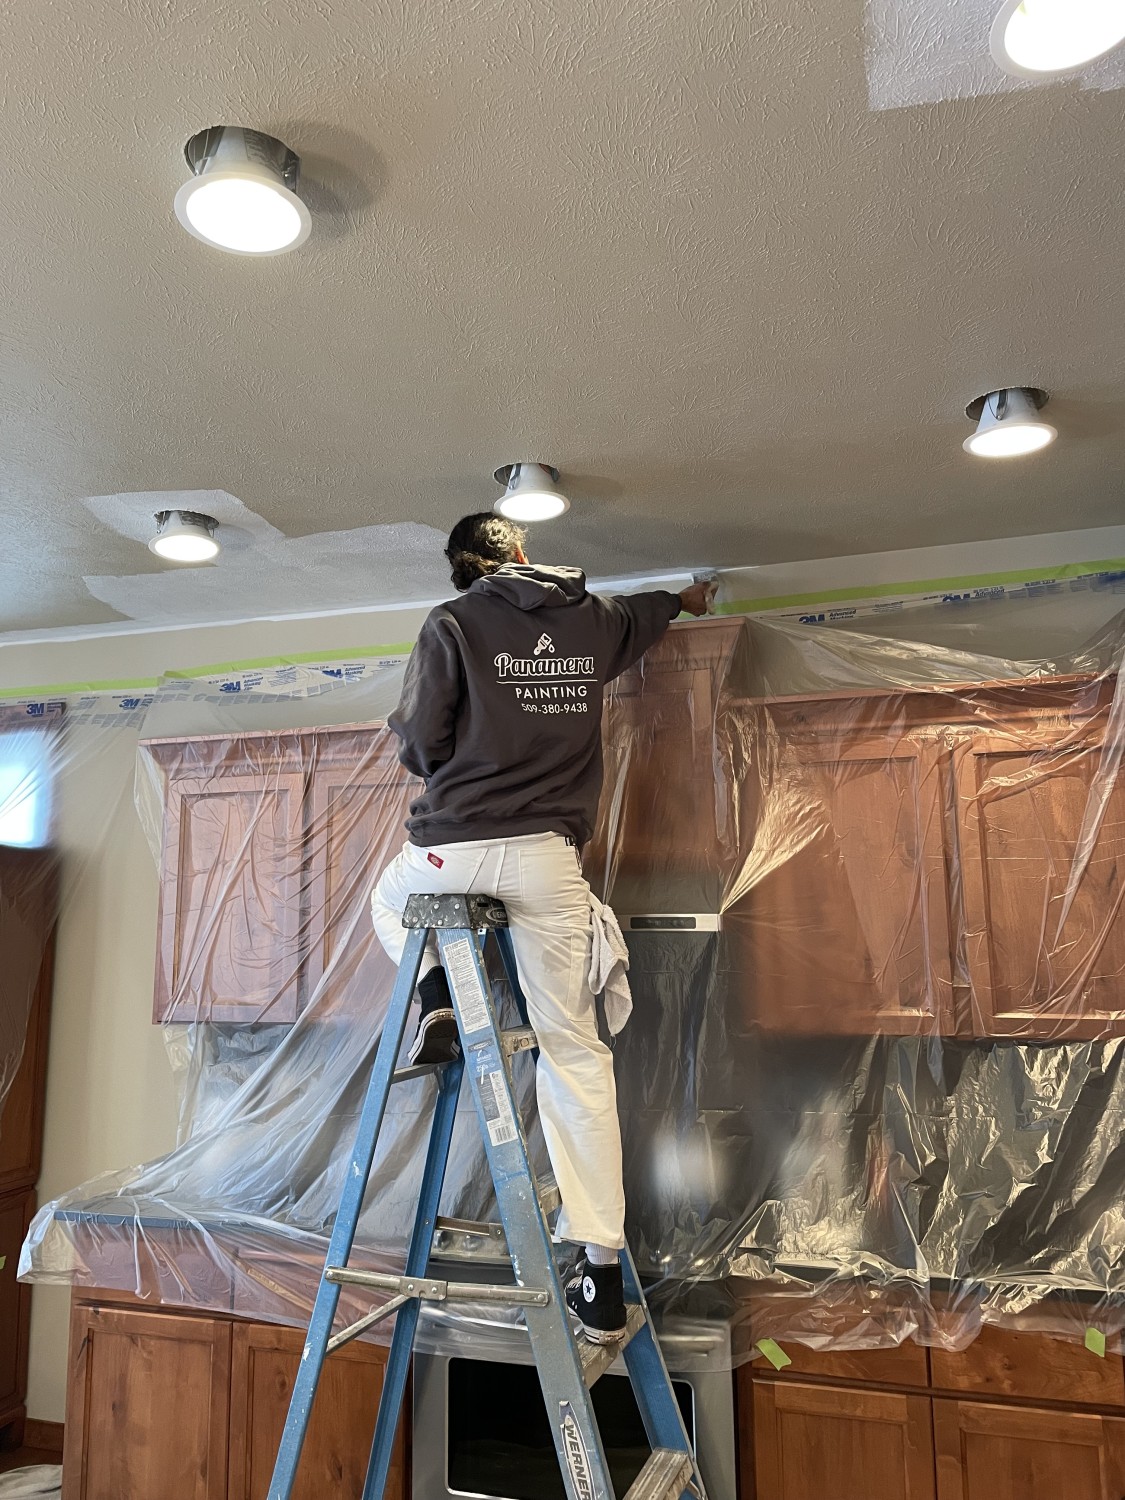 Quality painting services in Spokane, WA